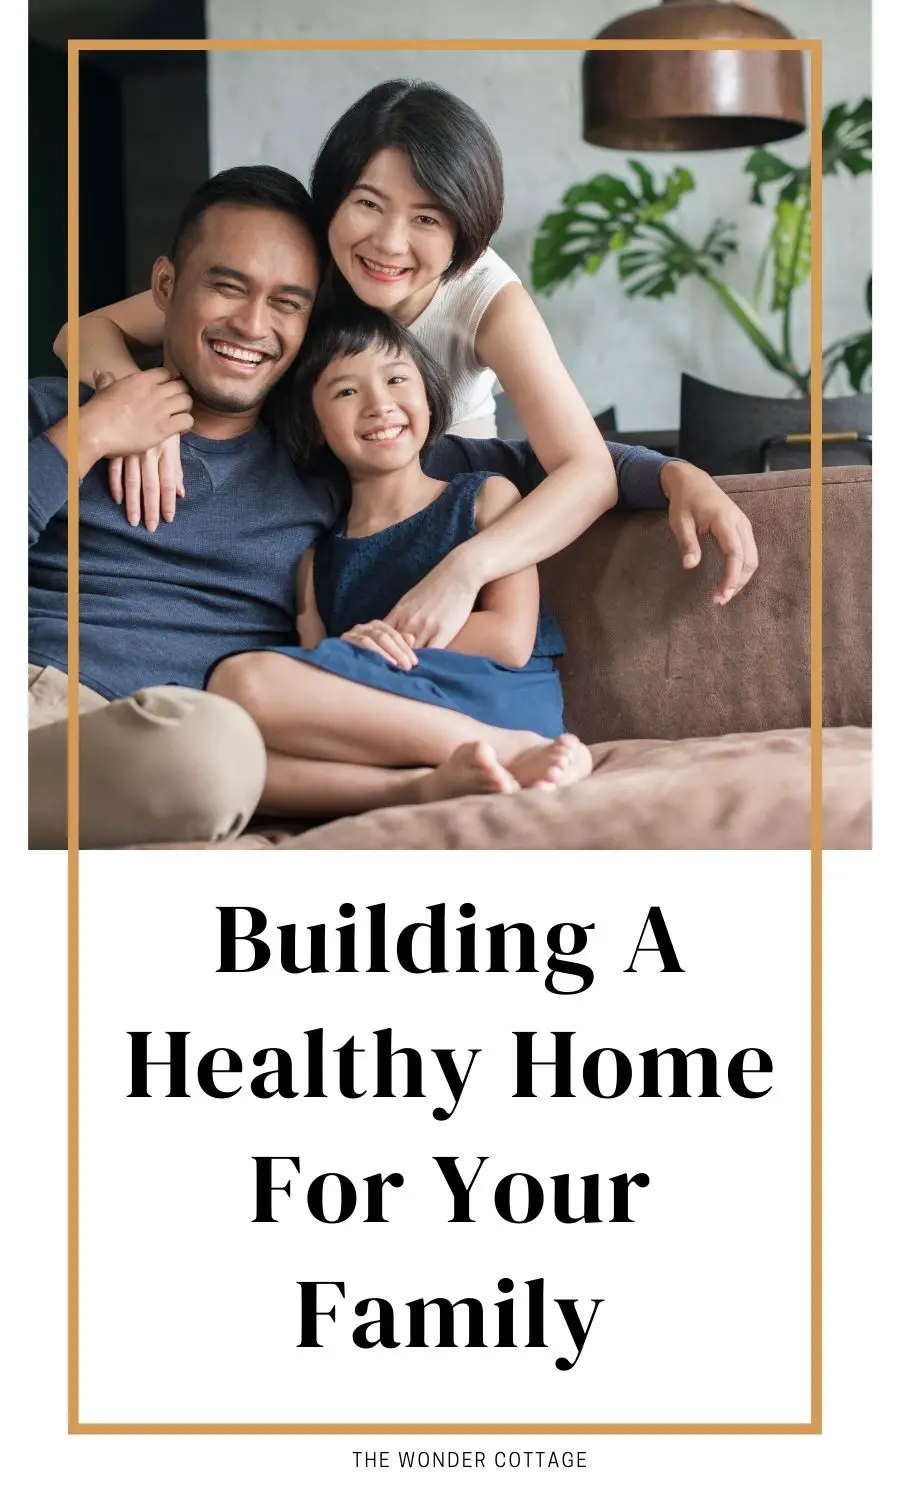 Building A Healthy Home For Your Family